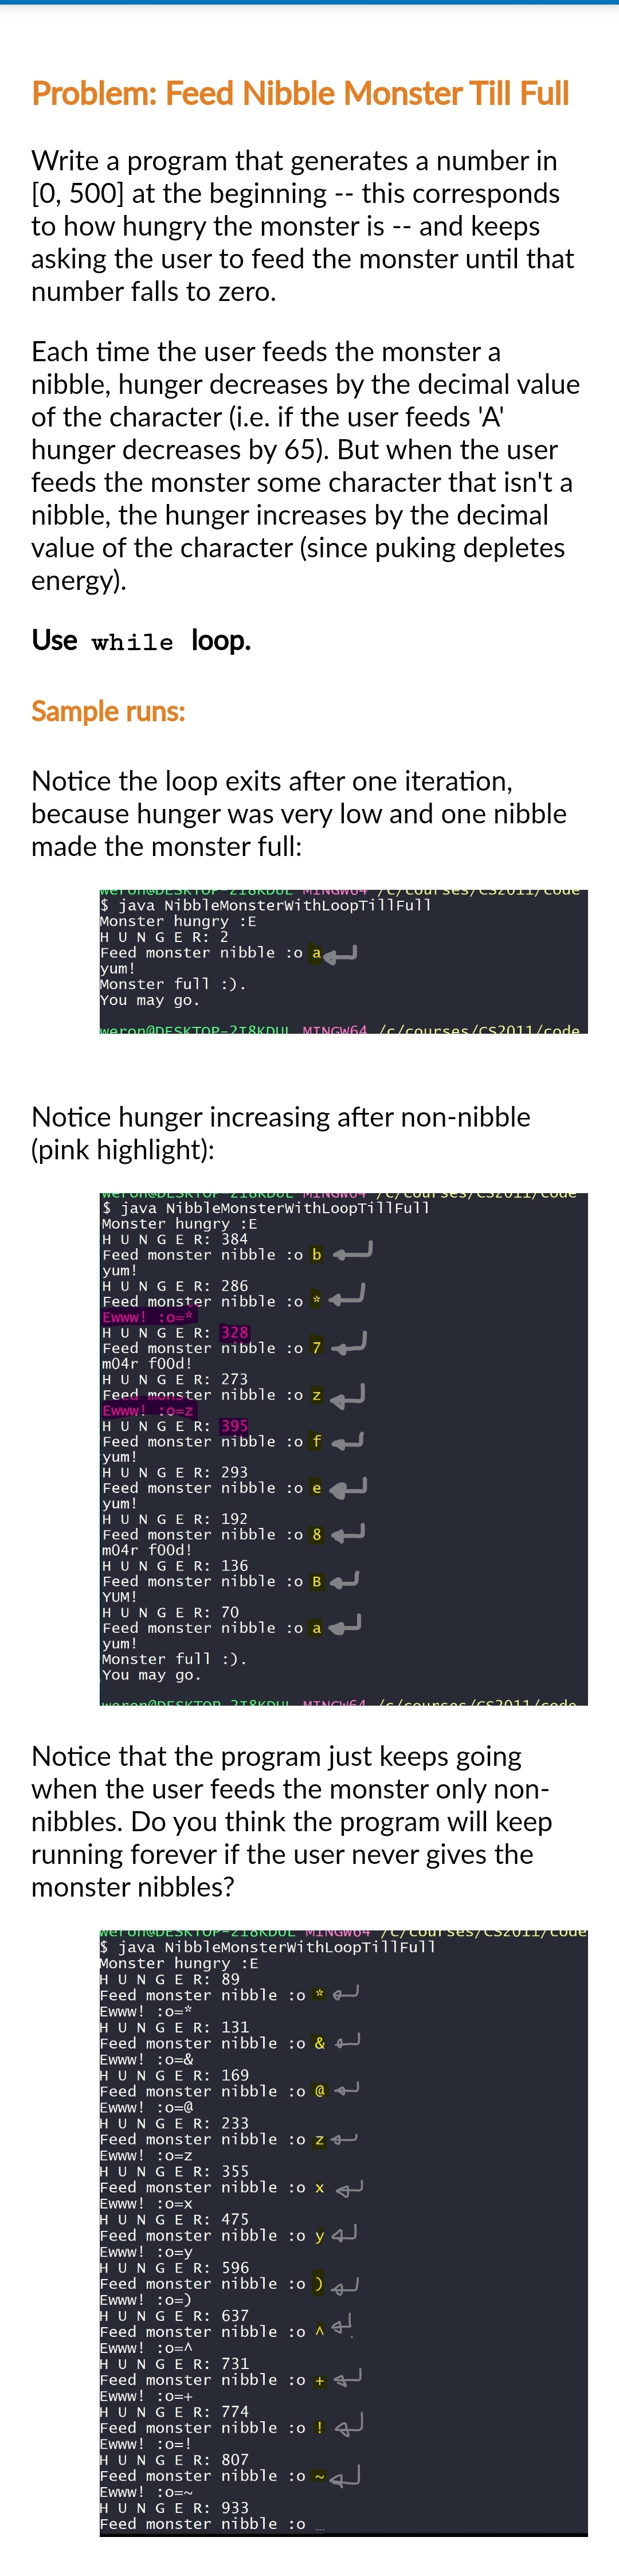 Problem: Feed Nibble Monster Till Full
Write a program that generates a number in
[0, 500] at the beginning -- this corresponds
to how hungry the monster is -- and keeps
asking the user to feed the monster until that
number falls to zero.
Each time the user feeds the monster a
nibble, hunger decreases by the decimal value
of the character (i.e. if the user feeds 'A'
hunger decreases by 65). But when the user
feeds the monster some character that isn't a
nibble, the hunger increases by the decimal
value of the character (since puking depletes
energy).
Use while loop.
Sample runs:
Notice the loop exits after one iteration,
because hunger was very low and one nibble
made the monster full:
Wet Off DESKTOP ZIONDUL MINGWO4 /C/COUT SES/CSZU11/ Code
$ java NibbleMonsterwithLoopTill Full
Monster hungry :E
HUNGER: 2
Feed monster nibble :o a
yum!
Monster full :).
You may go.
weron@DESKTOP-218KDUL MINGW64/c/courses/CS2011/code
Notice hunger increasing after non-nibble
(pink highlight):
DESKTOT ZIONDUL MINOWO" 77 courCS/CZUII/COue
$ java NibbleMonsterwithLoopTill Full
Monster hungry :E
HUNGE R: 384
Feed monster nibble :o b
yum!
HUNGE R: 286
Feed monster nibble :o *
Ewww! :O=*
HUNGER: 328
Feed monster nibble :0 7
m04r f00d!
HUNGE R: 273
Feed monster nibble :o z
Ewww! :O=Z
HUNGER: 395
Feed monster nibble :o f
yum!
HUNGER: 293
Feed monster nibble :o e
yum!
HUNGE R: 192
Feed monster nibble :08
m04r food!
HUNGE R: 136
Feed monster nibble :0 B
YUM!
HUNGE R: 70
Feed monster nibble :o a
yum!
Monster full :).
You may go.
7]
wonen@DESKTOR 2TOKDUL MINGWGA Ic/counces /cc2011/code
Notice that the program just keeps going
when the user feeds the monster only non-
nibbles. Do you think the program will keep
running forever if the user never gives the
monster nibbles?
Weron DESKTOP ZIORDUL MINGWO4 /C/Courses/CSZU11/ Code
$ java NibbleMonsterwithLoopTill Full
Monster hungry :E
HUNGER: 89
Feed monster nibble :0
Ewww! :O=*
HUNGE R: 131
Feed monster nibble :o & +
Ewww! :O=&
HUNGER: 169
Feed monster nibble :o @
Ewww! :o=@
HUNGE R: 233
Feed monster nibble :o z 4
Ewww! :0=Z
HUNGER: 355
Feed monster nibble :0 x
Ewww! :0=X
HUNGE R: 475
Feed monster nibble :o y 4
Ewww! :o=y
HUNGE R: 596
Feed monster nibble :o)
Ewww! :0=)
HUNGE R: 637
Feed monster nibble :0 ^
Ewww! :O=A
HUNGE R: 731
Feed monster nibble :0 +
Ewww! :0=+
HUNGER: 774
Feed monster nibble :0 !
Ewww! :O=!
HUNGER: 807
Feed monster nibble :0
Ewww! :O=~
HUNGER: 933
Feed monster nibble :0
2
له